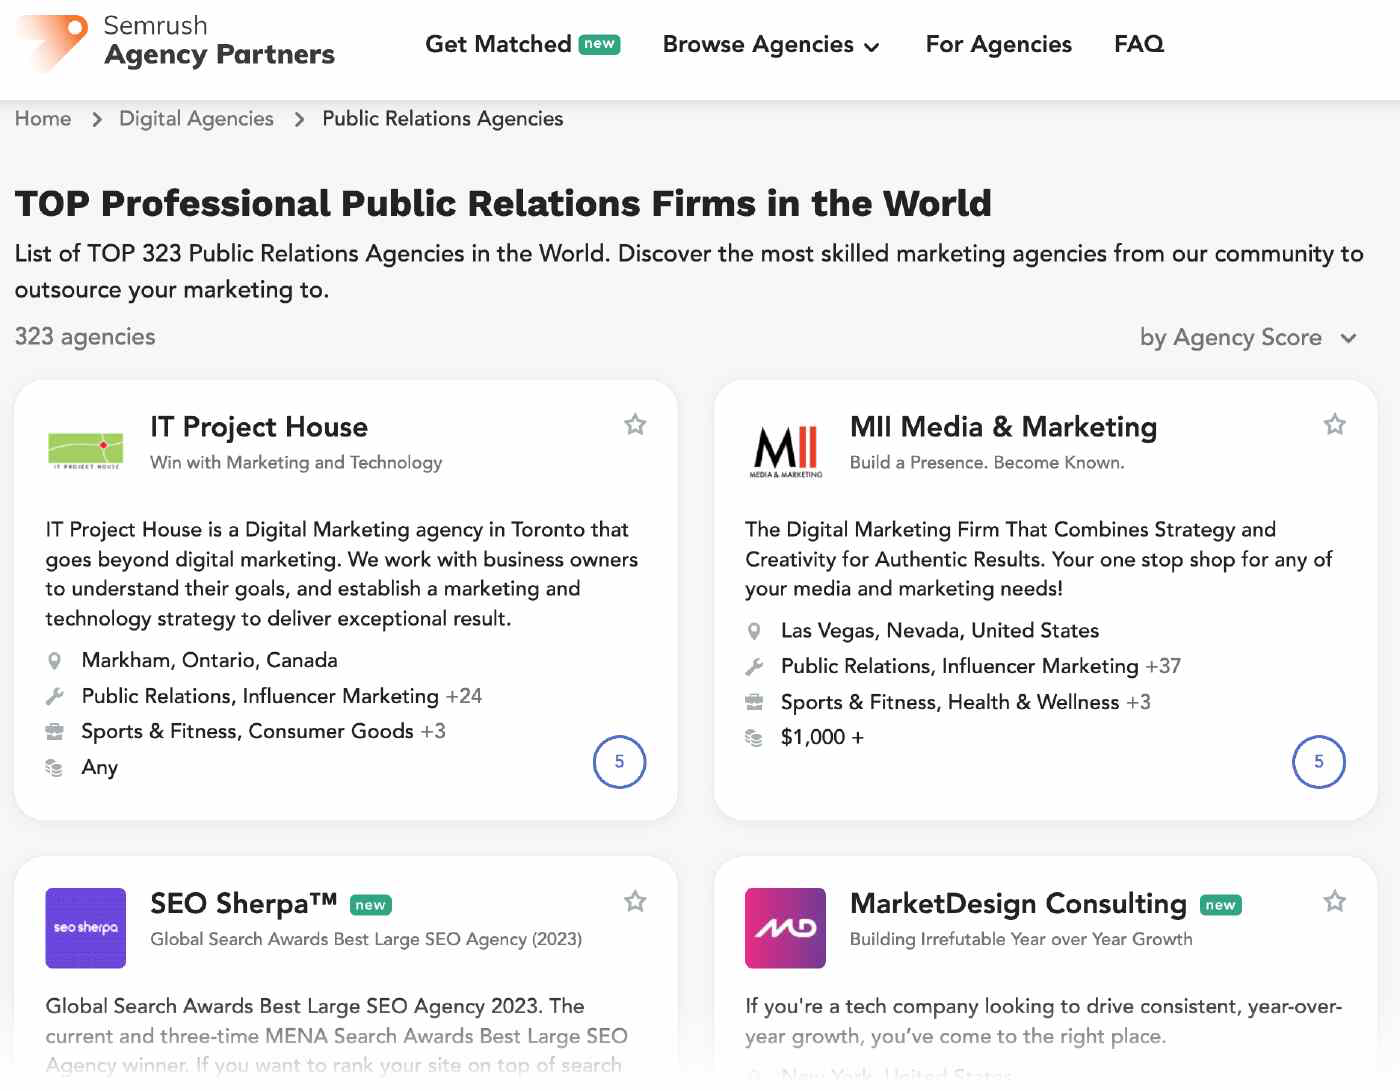 "TOP Professional Public Relations Firms in the World" page in Agency Partners